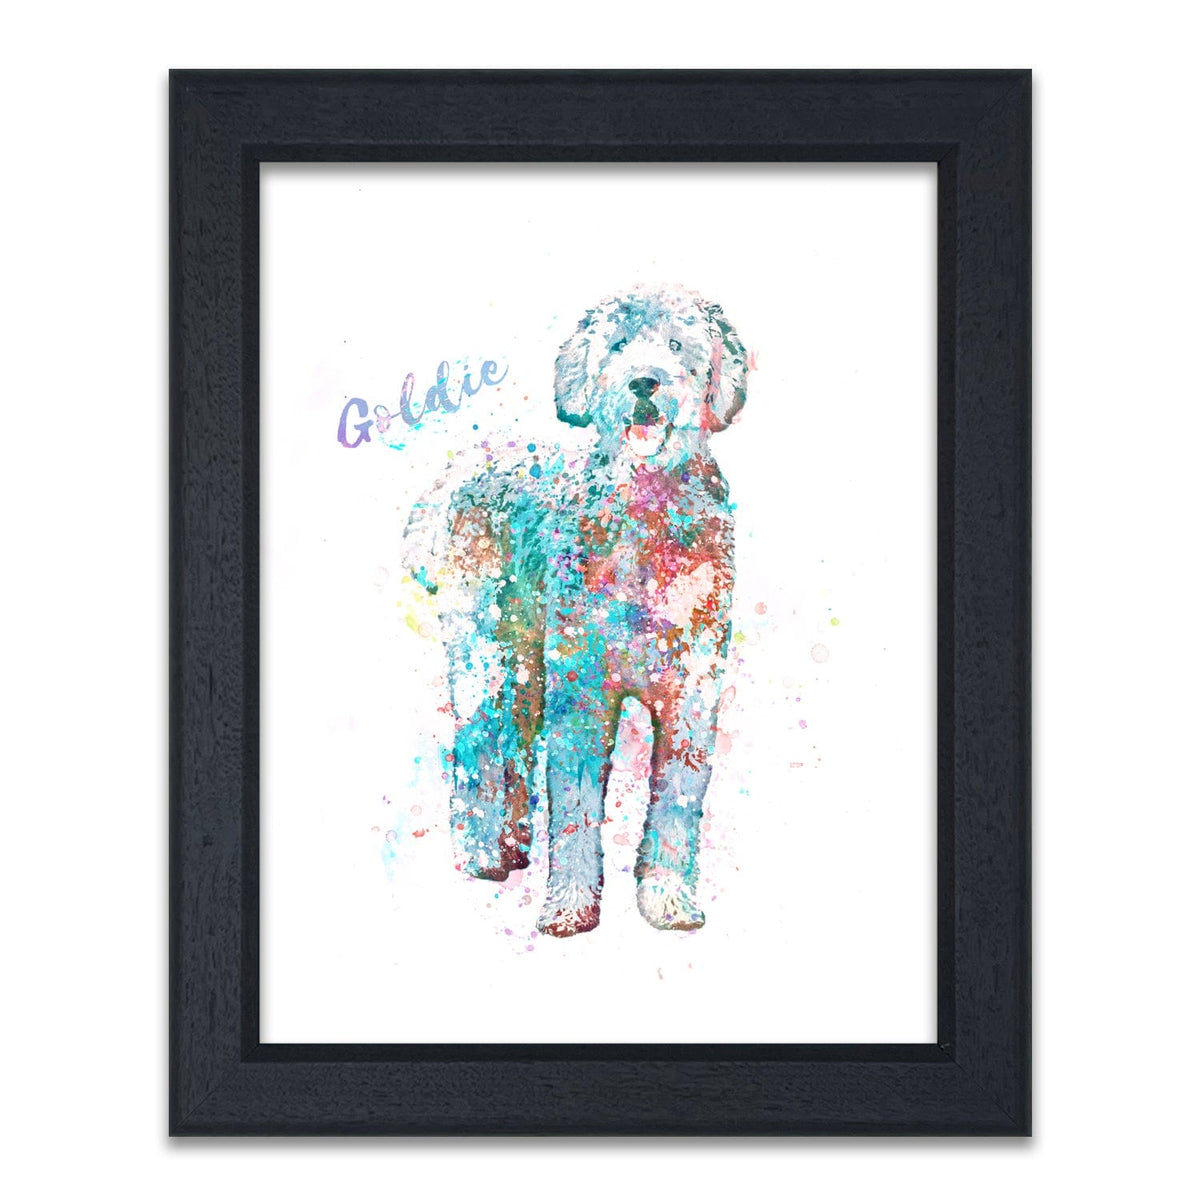 Framed Goldendoodle art customized with dogs name from Personal-Prints